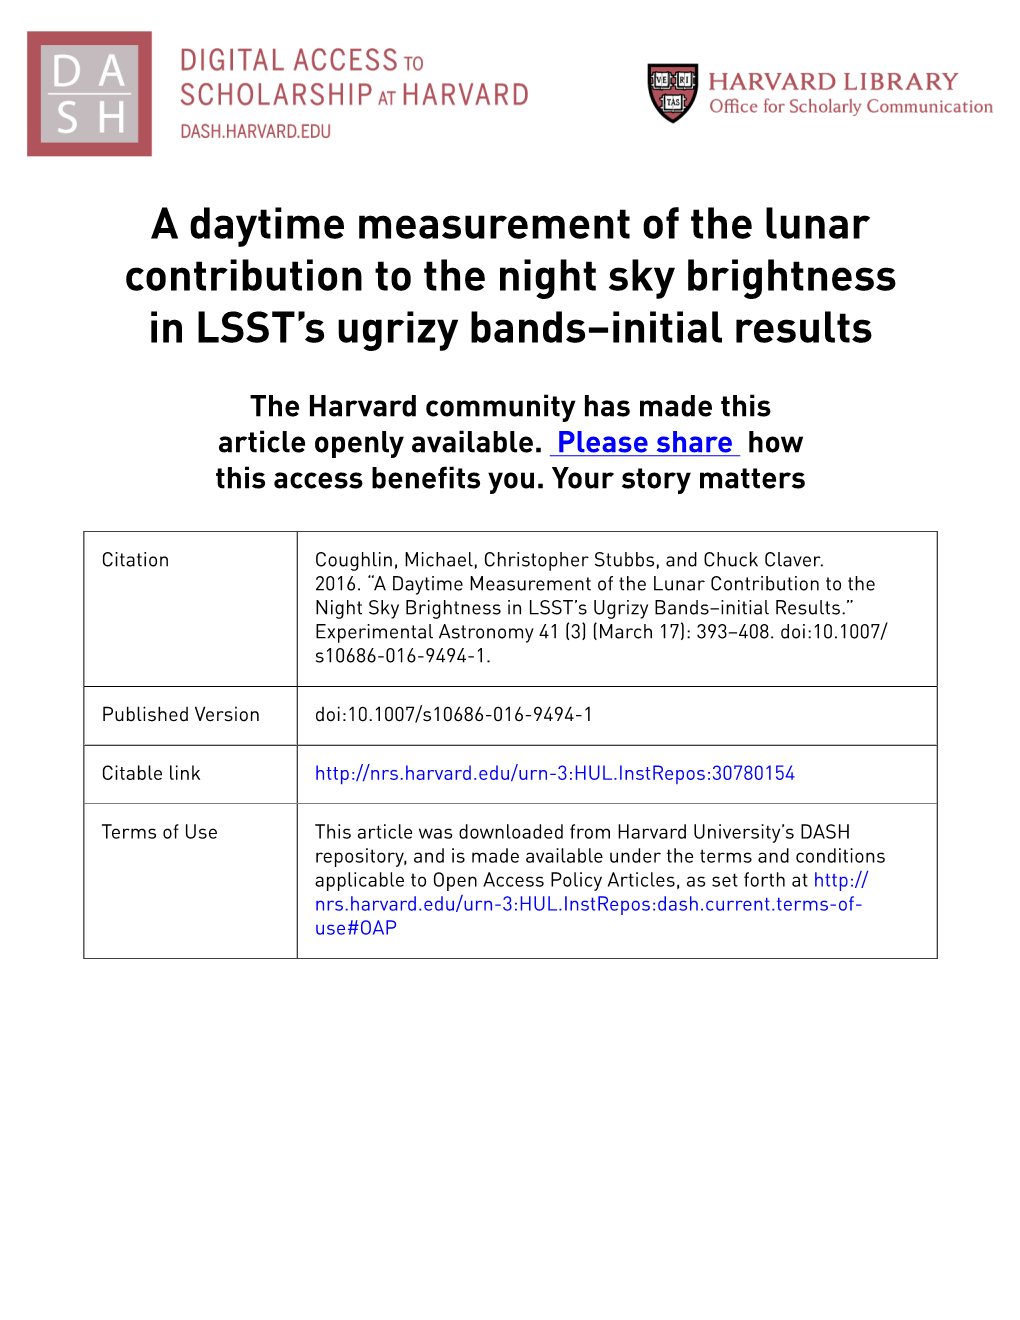 A Daytime Measurement of the Lunar Contribution to the Night Sky Brightness in LSST's Ugrizy Bands–Initial Results